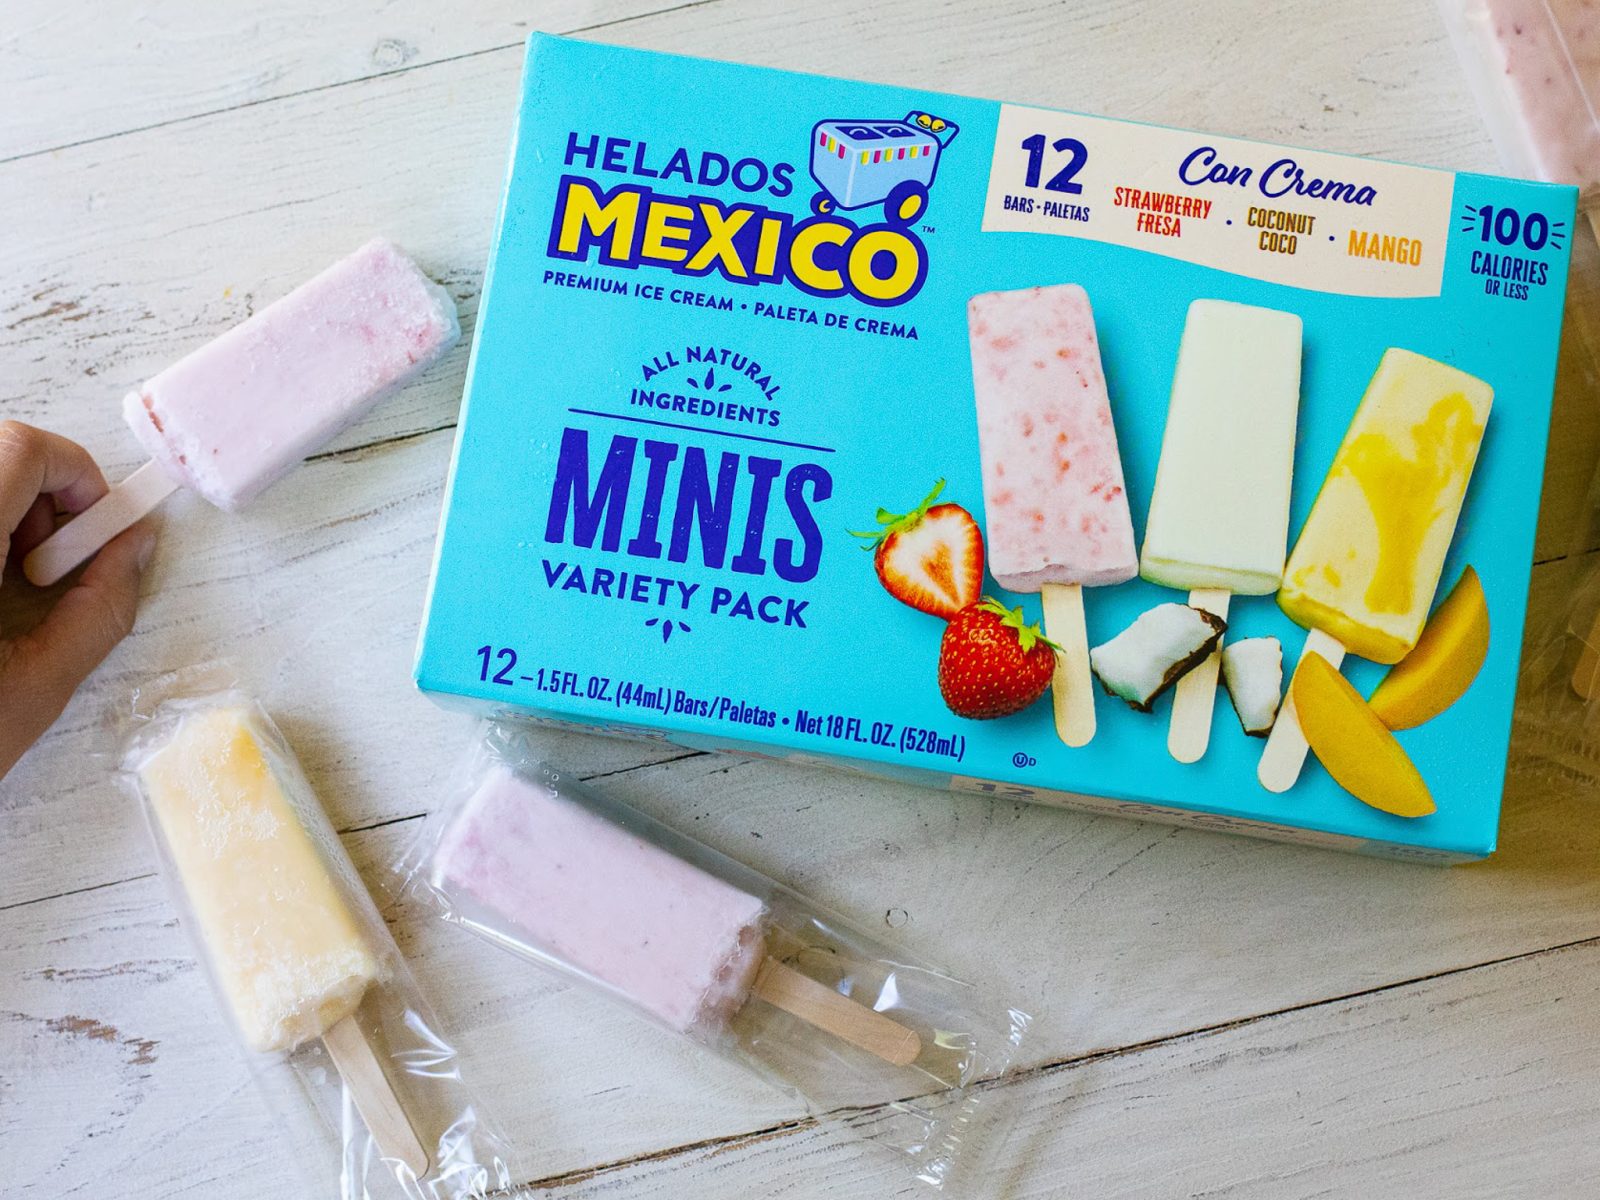 Get Helados Mexico Ice Cream Bars For Just $2 At Publix